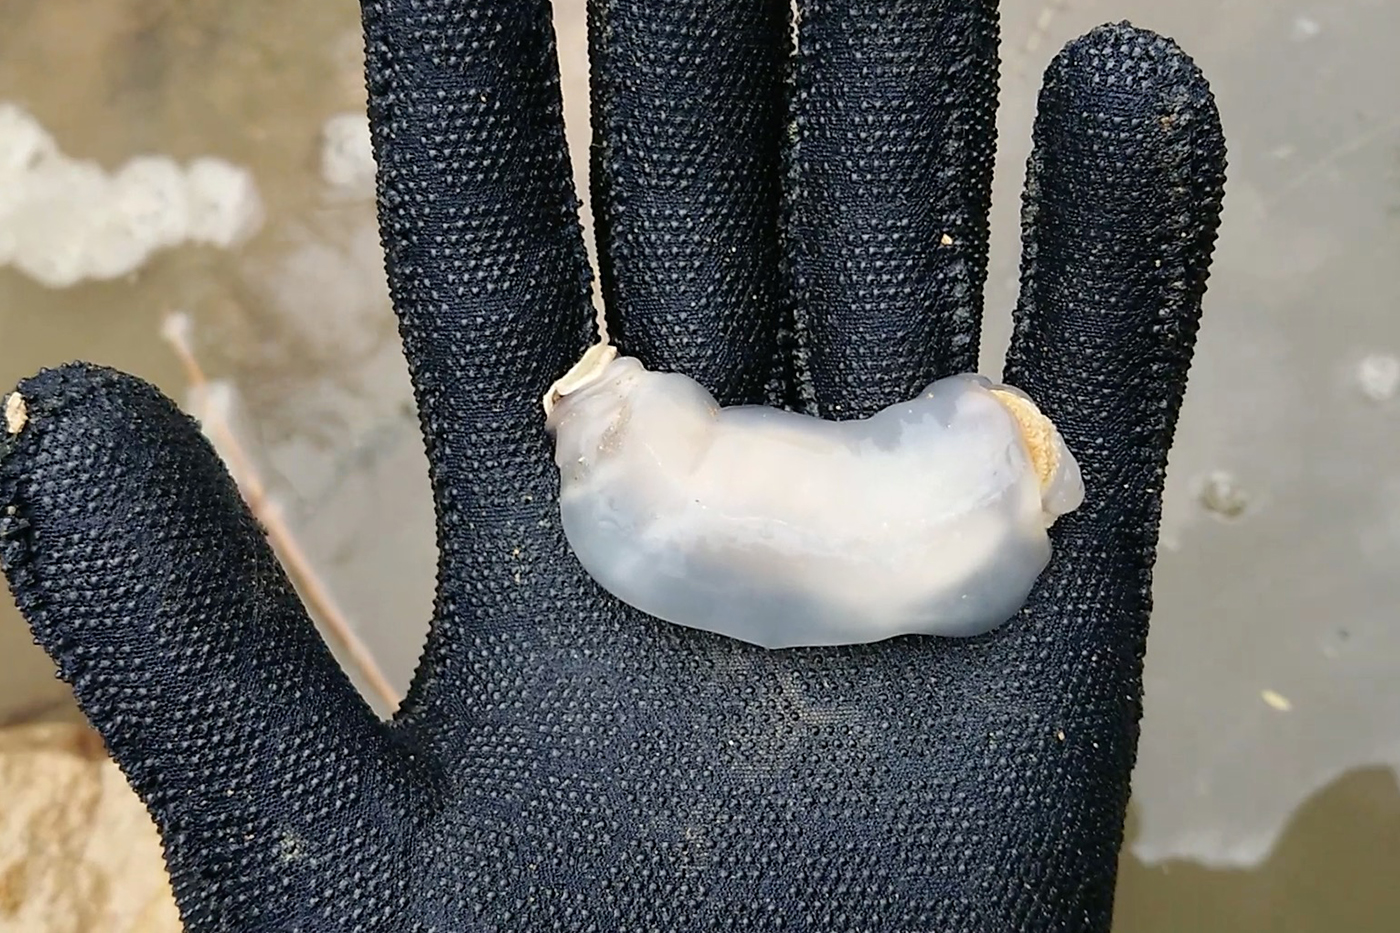 Researchers from Northeastern’s Ocean Genome Legacy Center  discover a new genus and species of shipworm that eats rocks in the Philippines